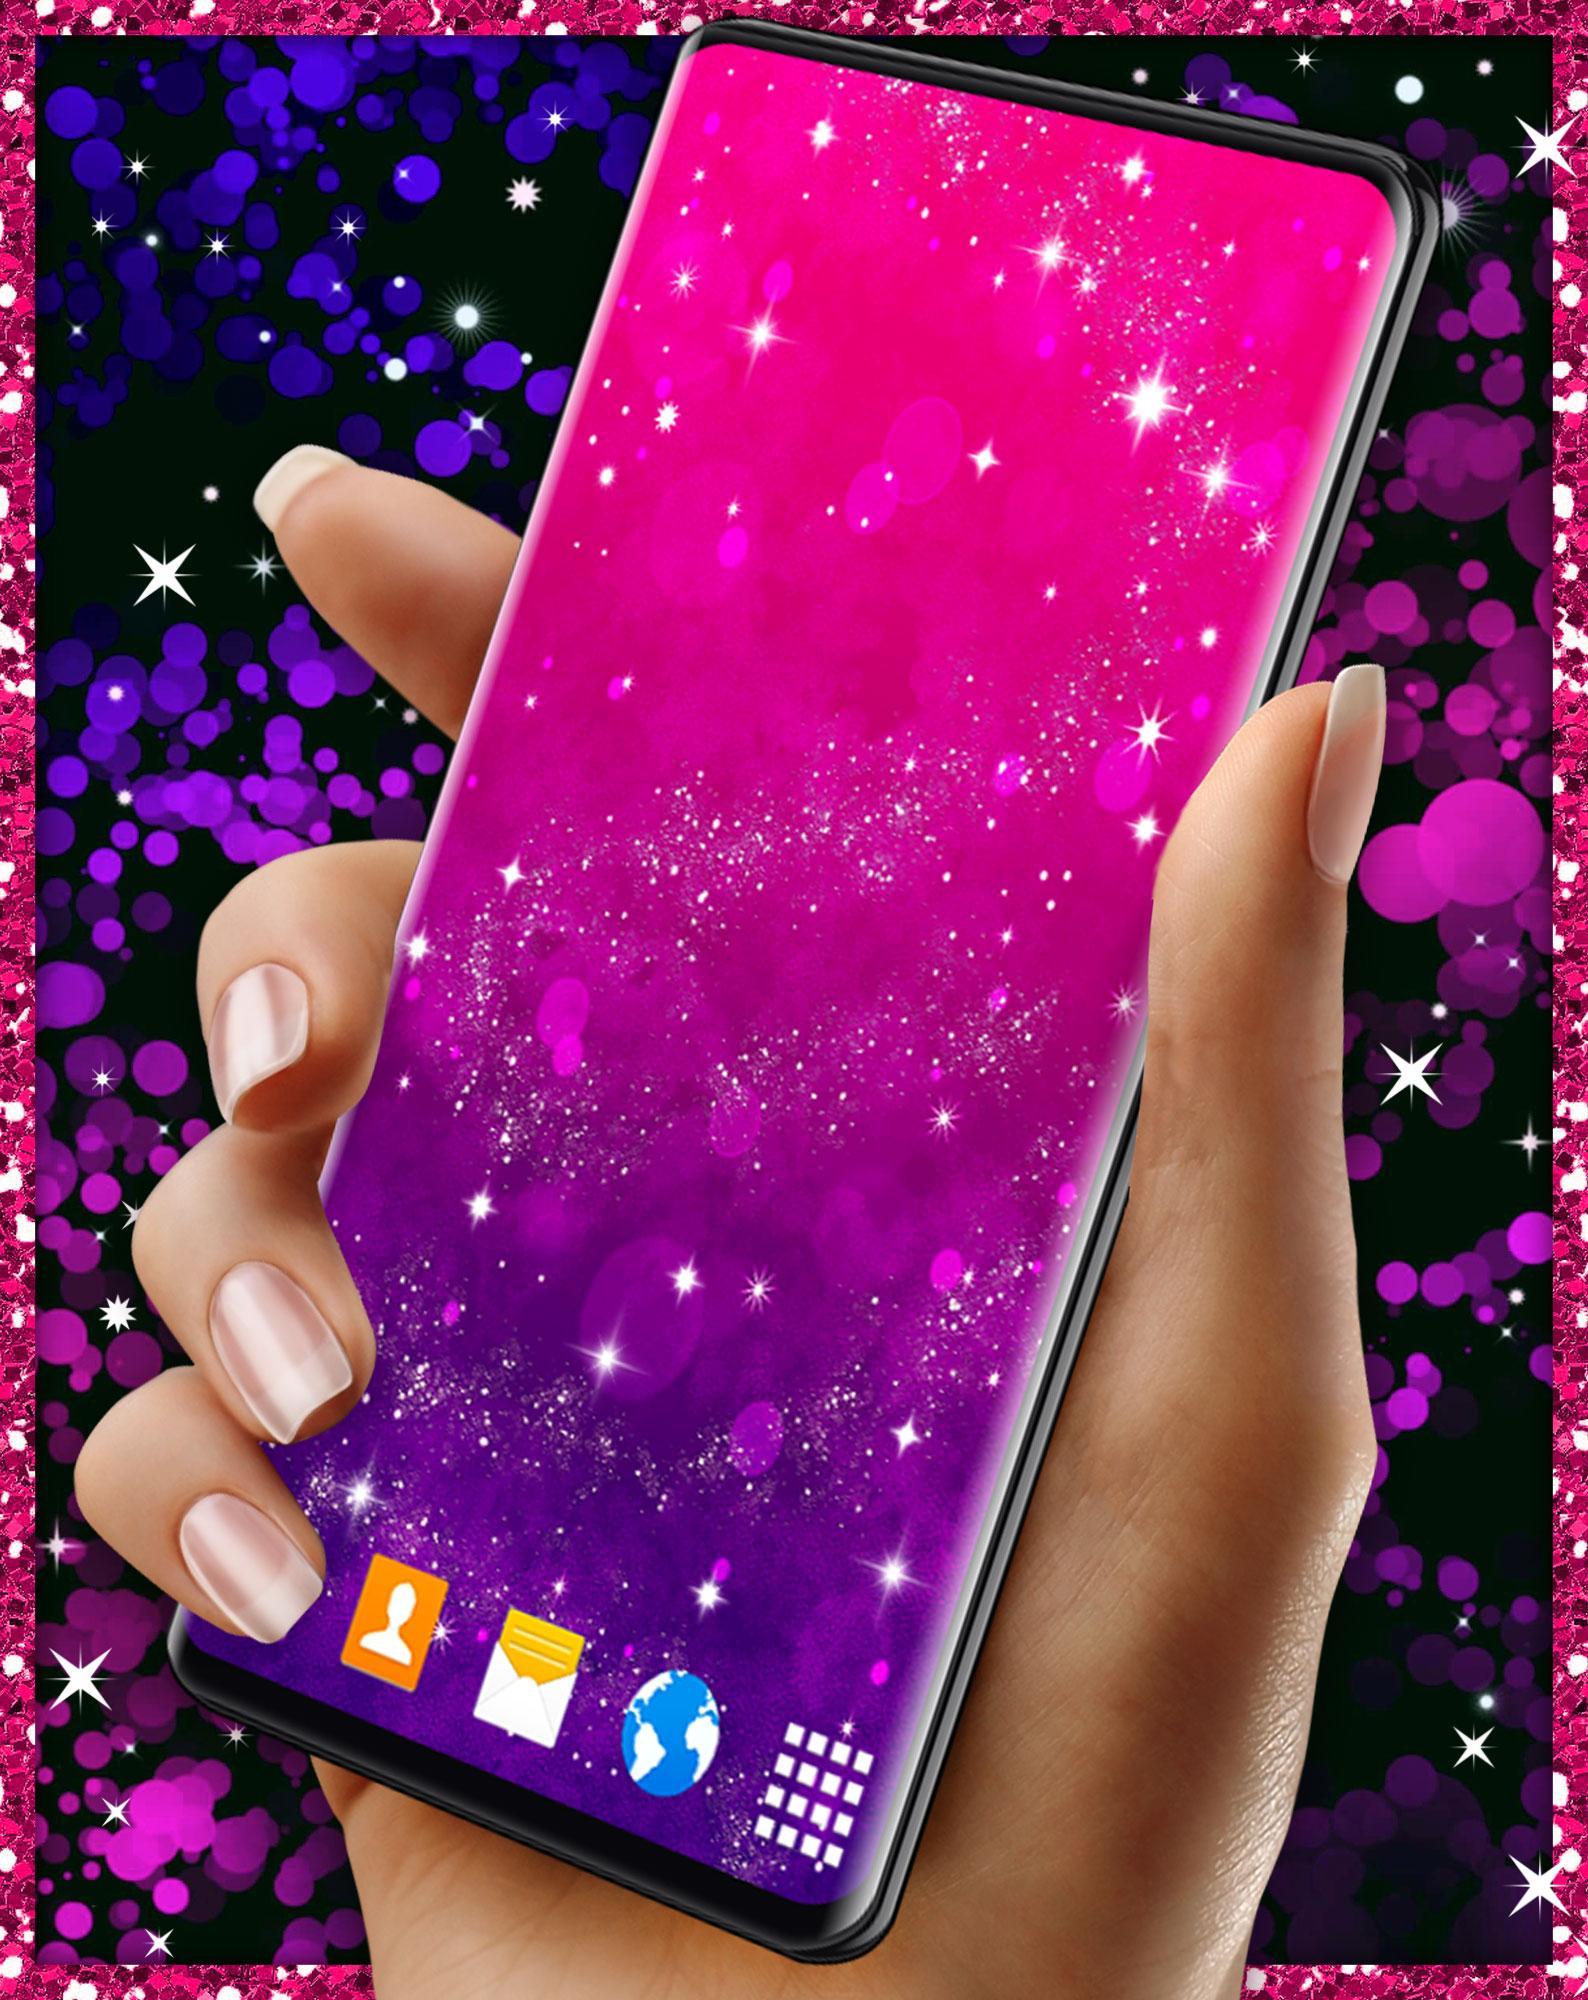 Free Live Wallpaper for Xperia ❤️ Best Wallpapers 6.7.7 Screenshot 7